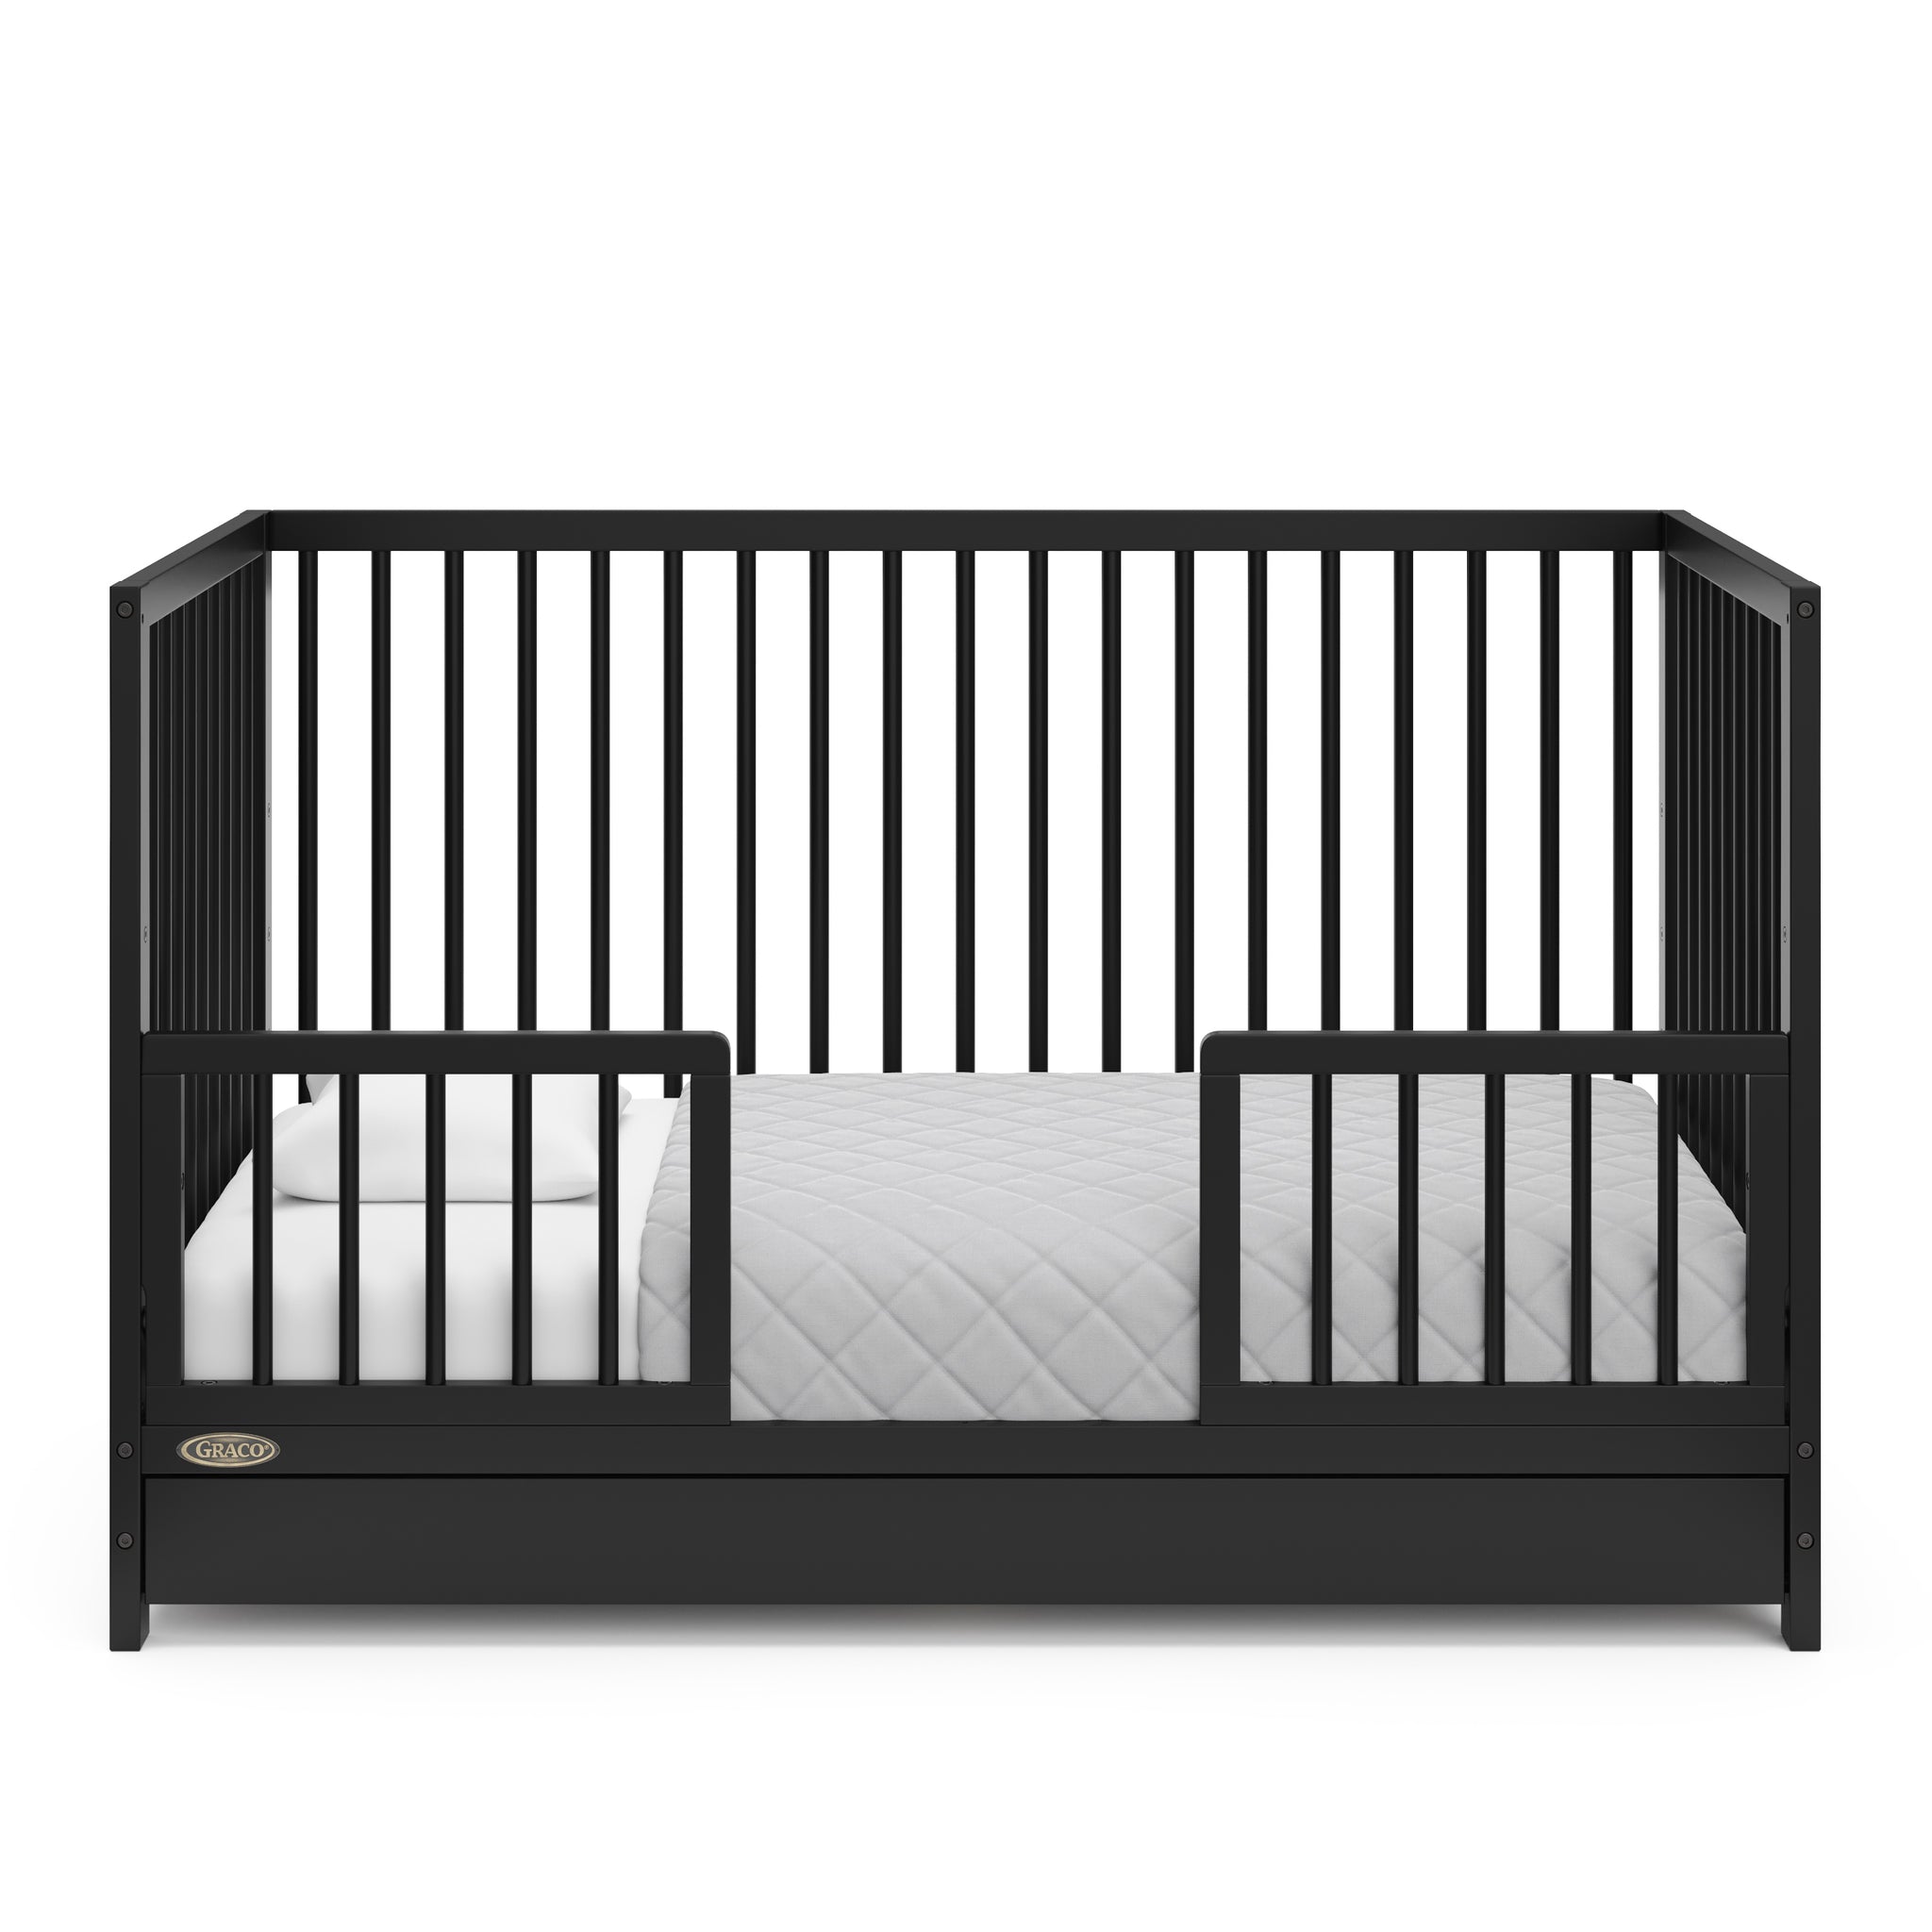 Black Toddler Safety Guardrail Kit with dowels applied in toddler bed